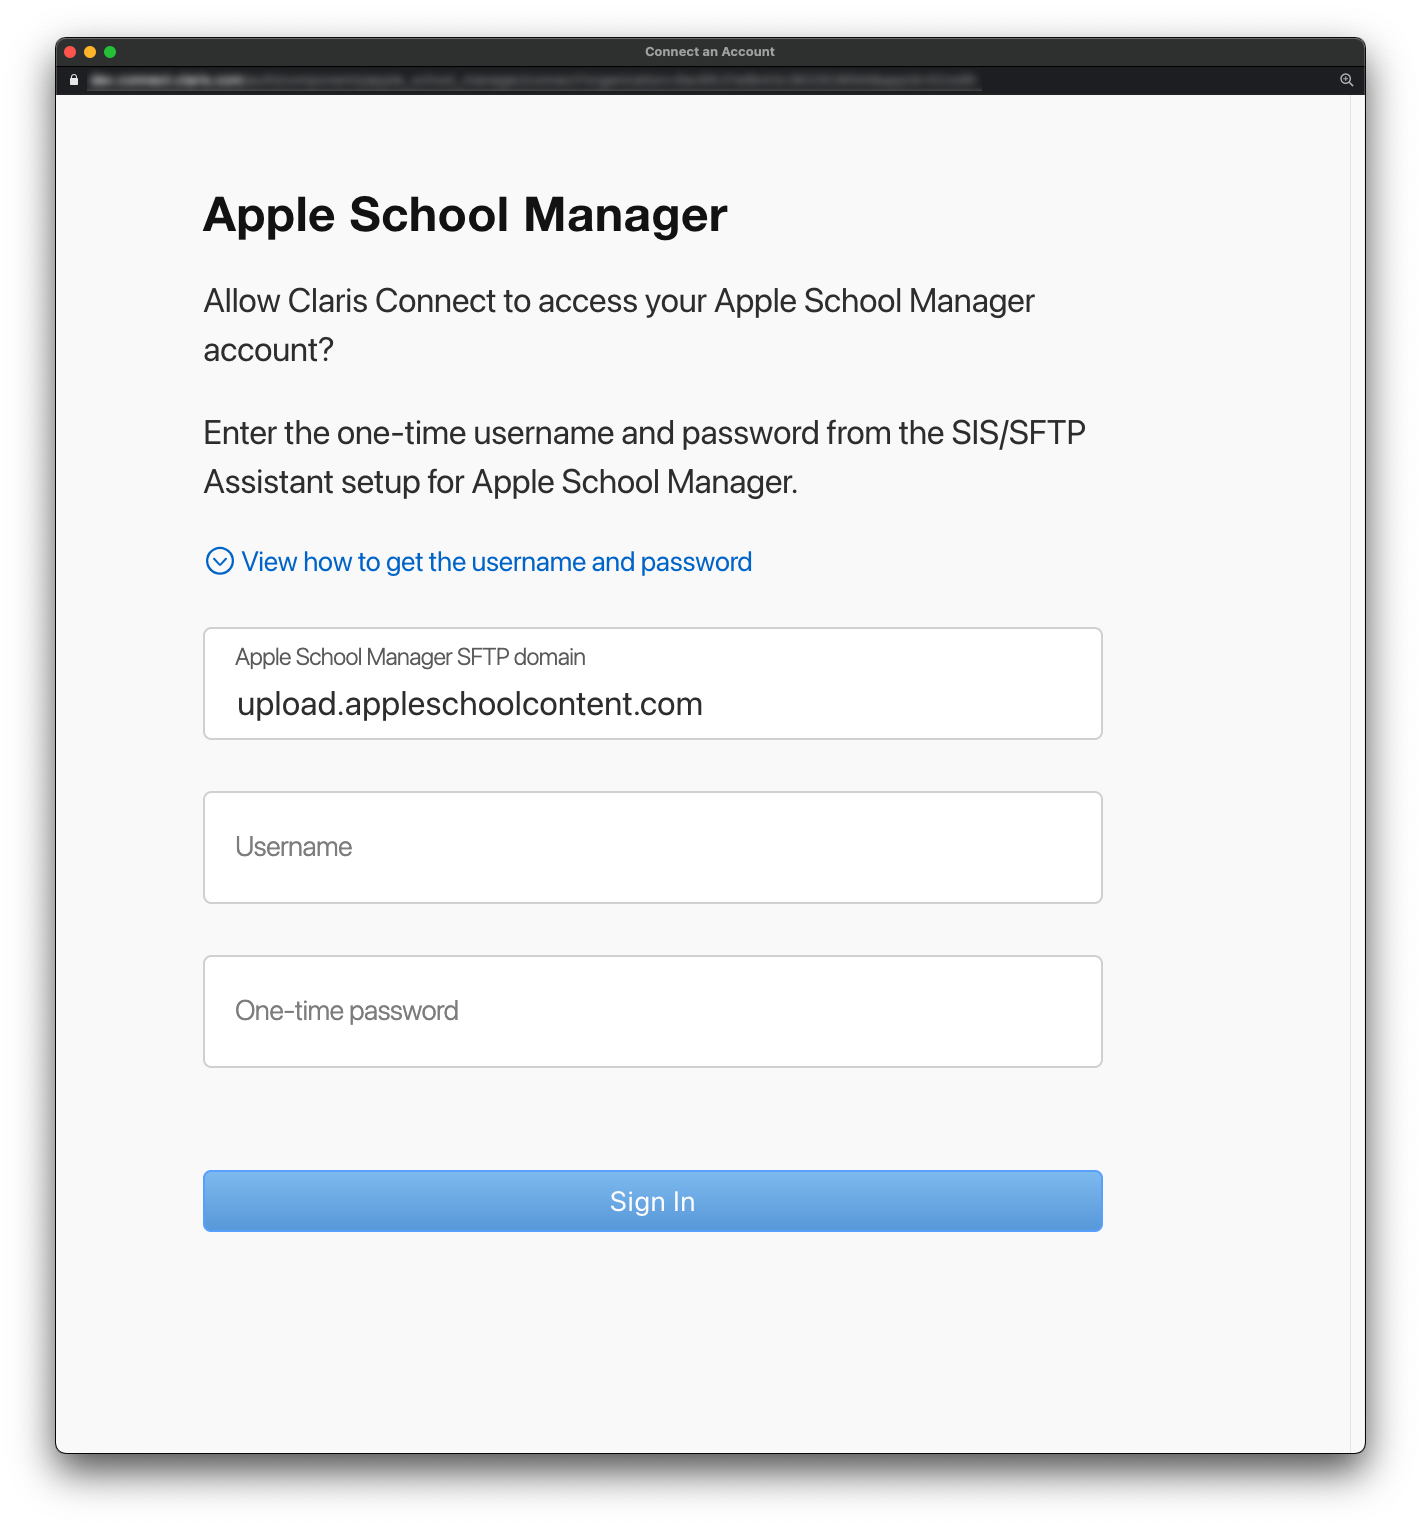 The Apple School Manager dialog